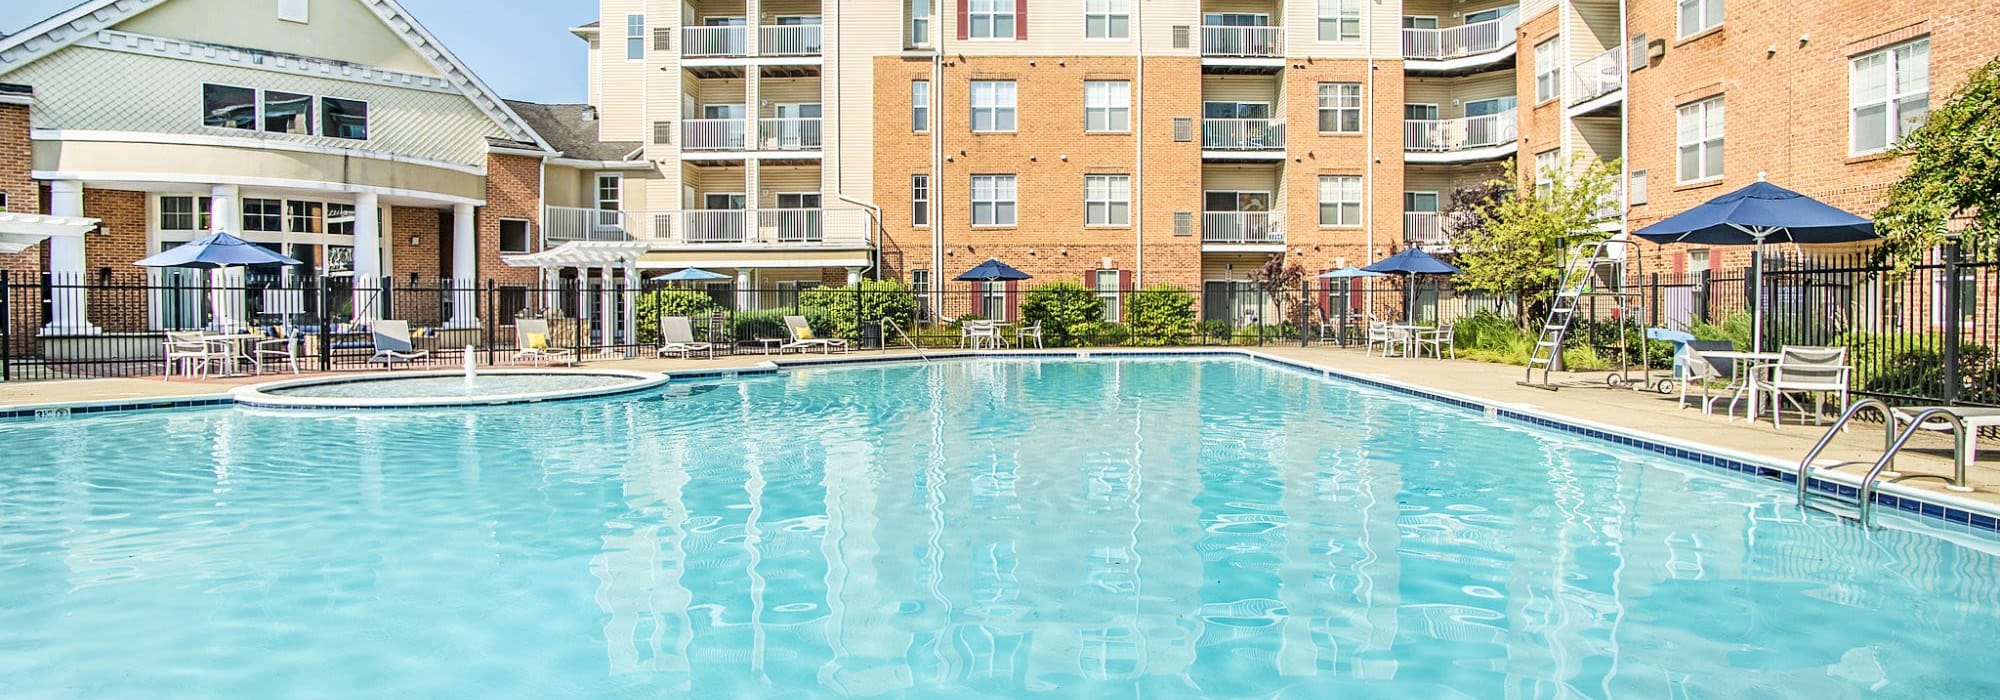 Amenities at Concord Park in Laurel, Maryland